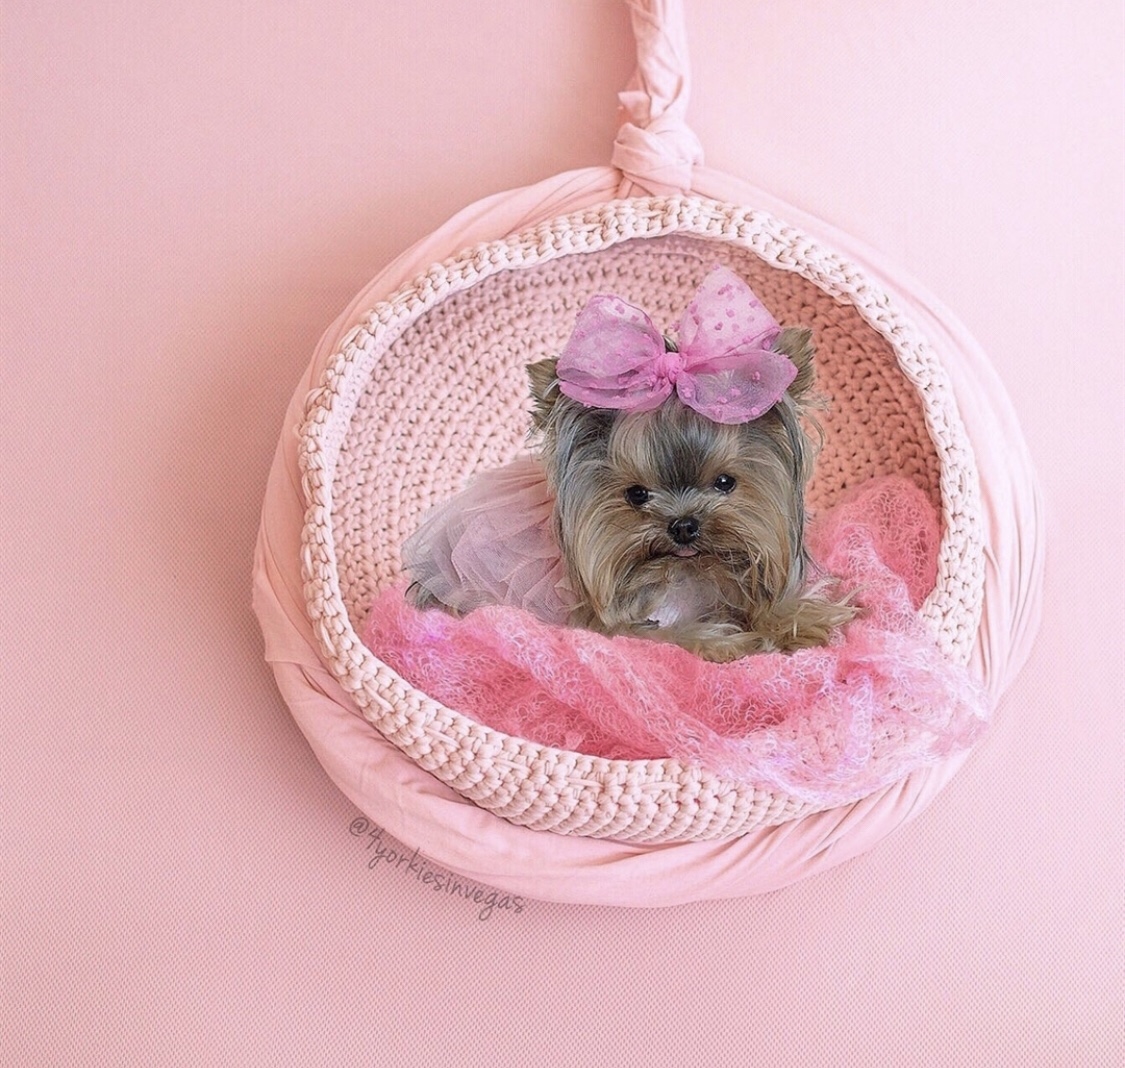 Yorkshire Terrier wearing a pink tutu and a ribbon on top of its head lying inside a circle crocheted hanging bed in a pink background